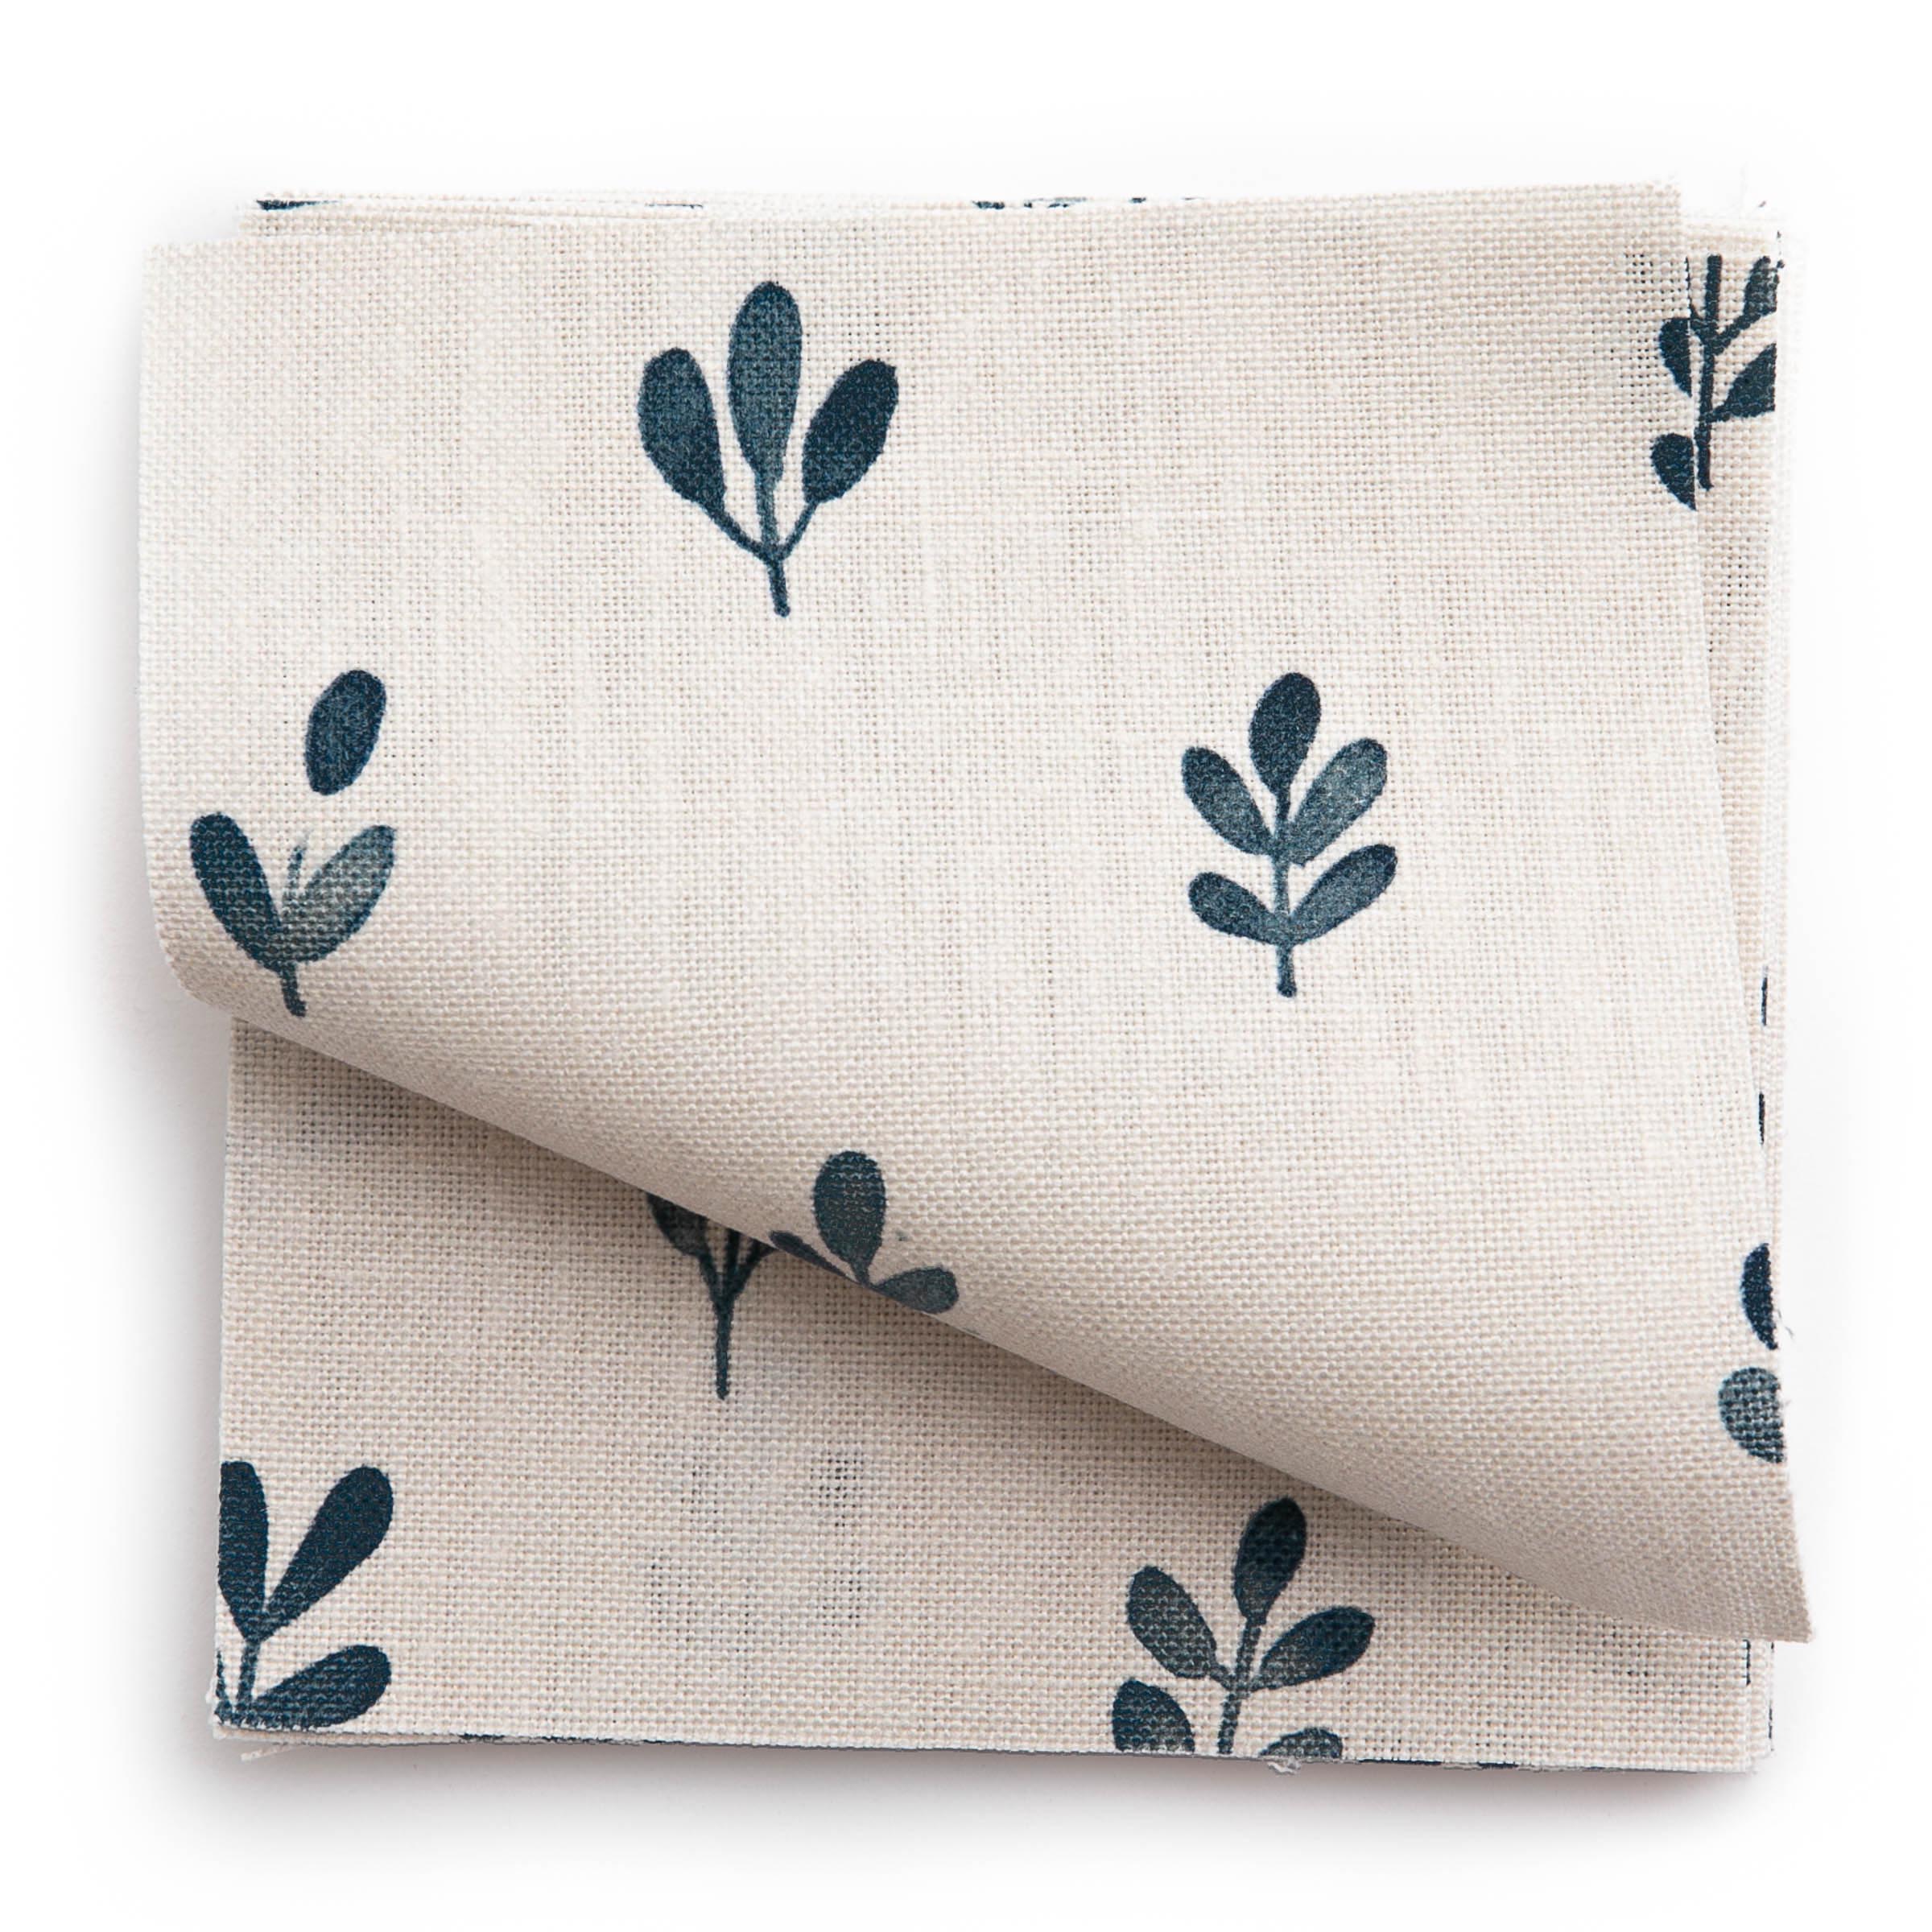 A stack of fabric swatches in a repeating leaf print in navy on a cream field.